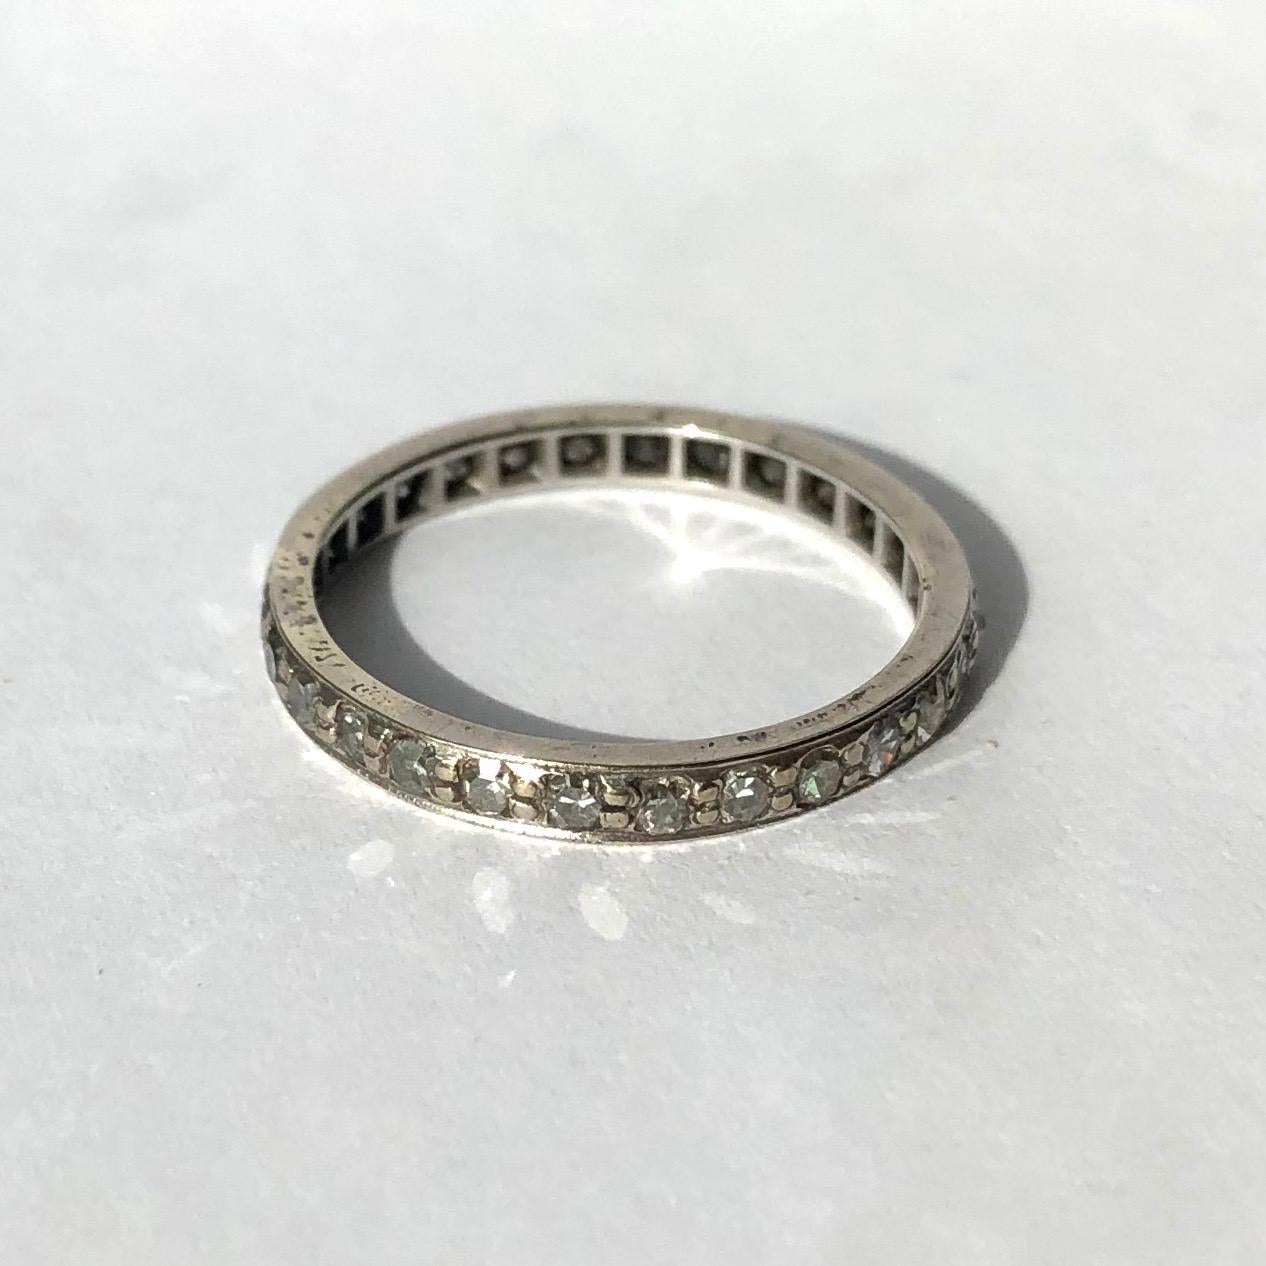 This classic diamond eternity would make a sparkly everyday wear or a fancy wedding band. Perfect to stack! The total weight of the old European cut diamonds is approx 30pts. 

Ring Size: N 1/2 or 7
Band Width: 2mm

Weight: 2.47g